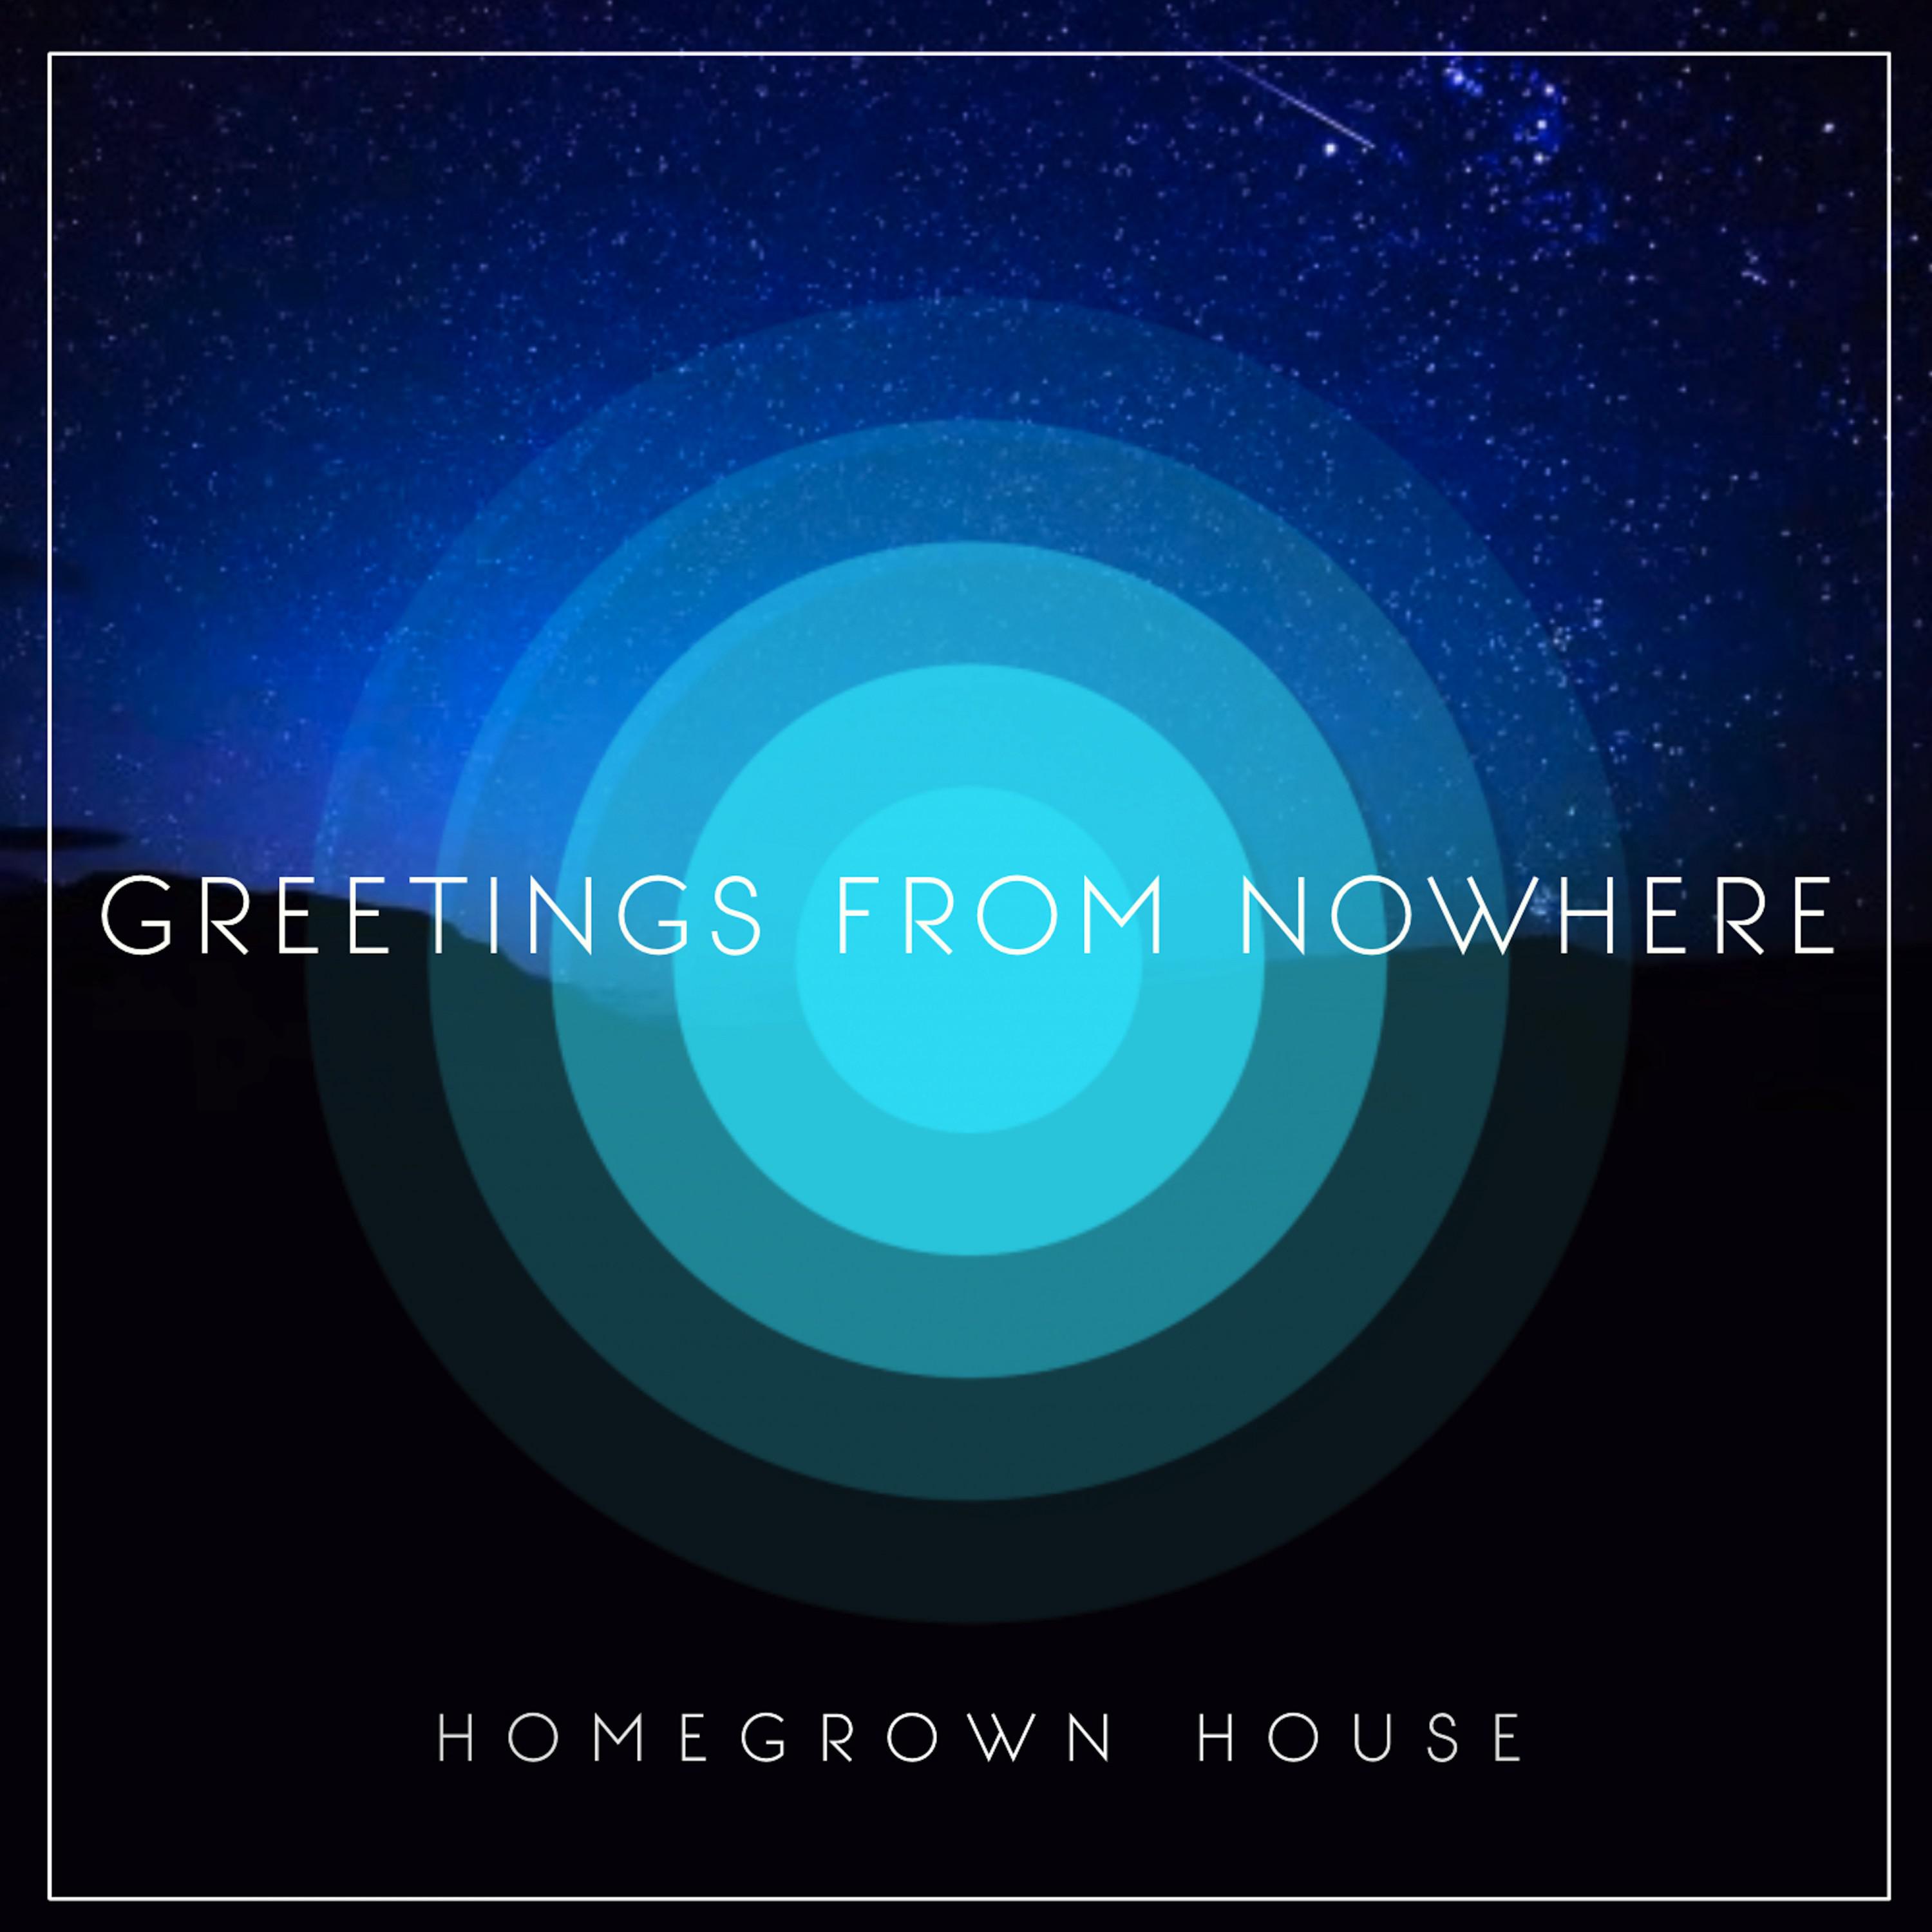 Homegrown House - Greetings From Nowhere